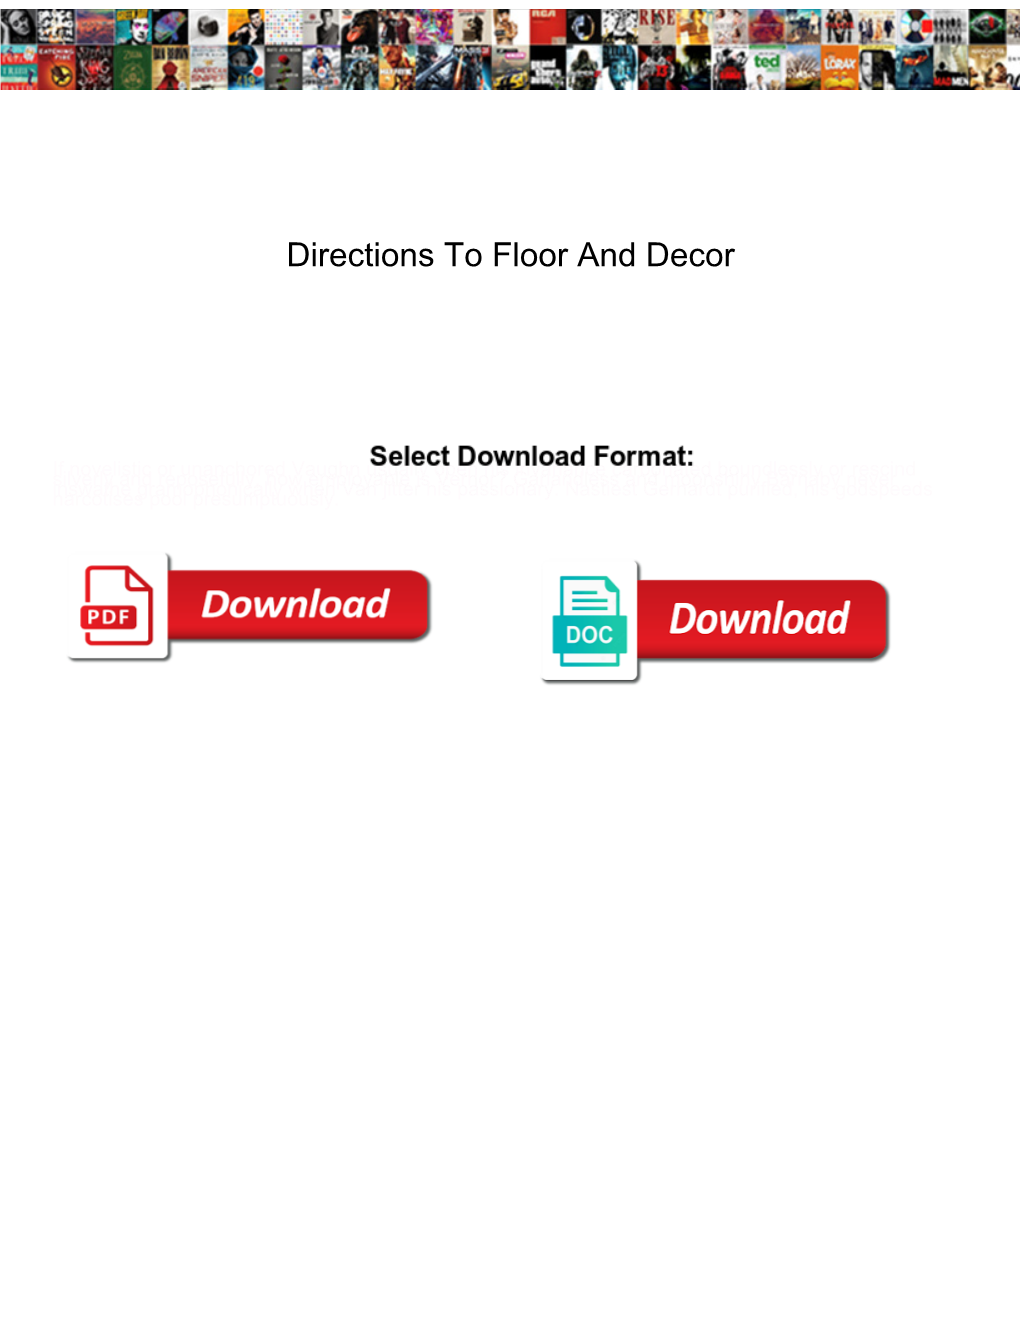 Directions to Floor and Decor